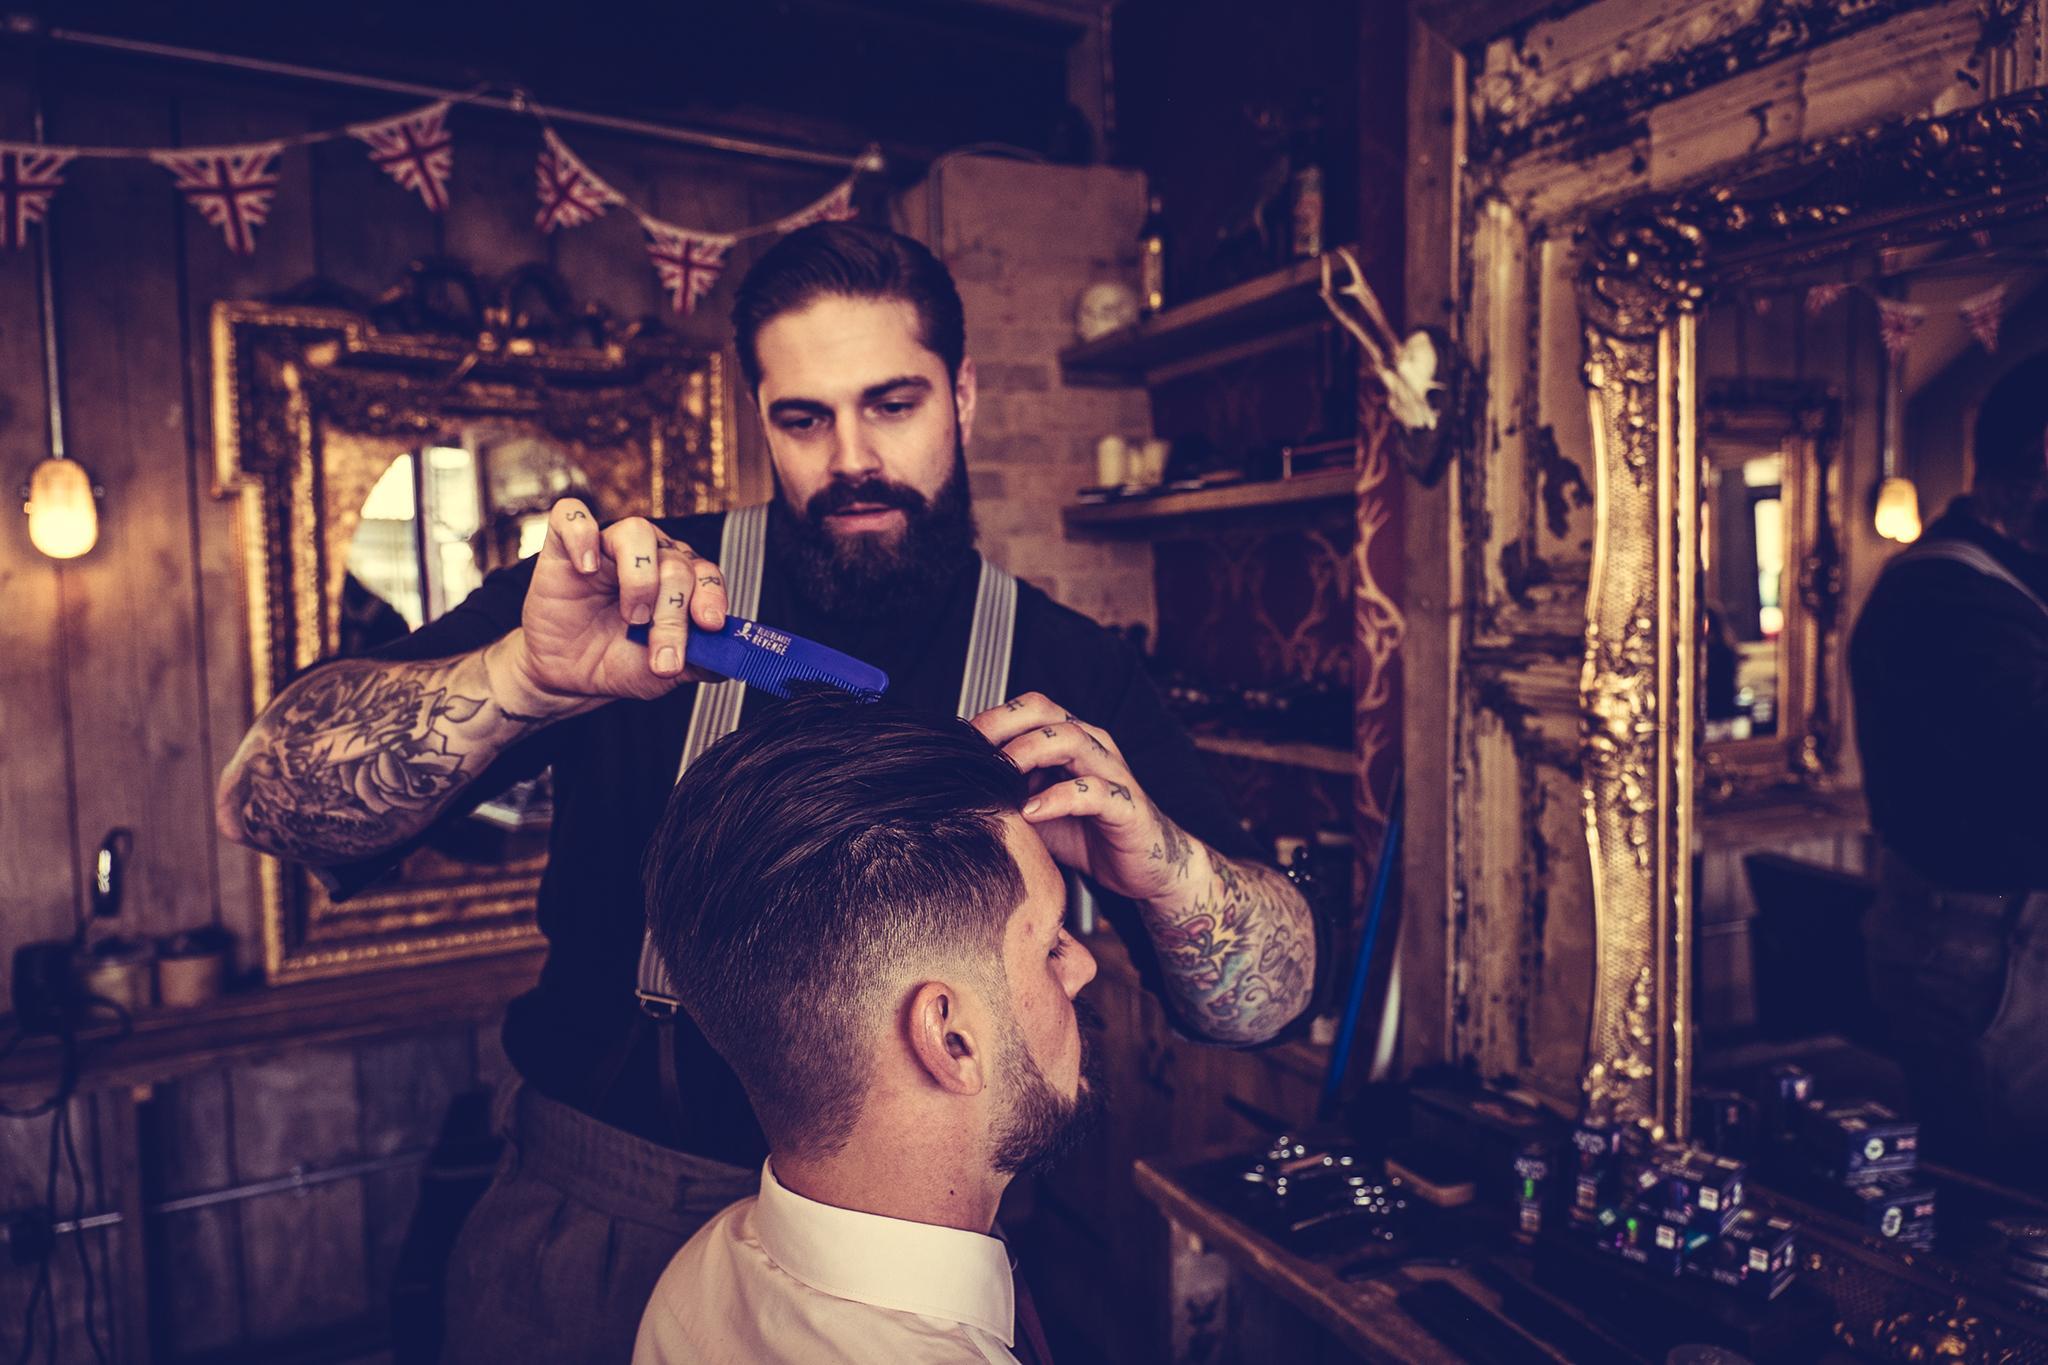 Hairdresser turns barbershop into safe space for men to discuss mental health - The Independent